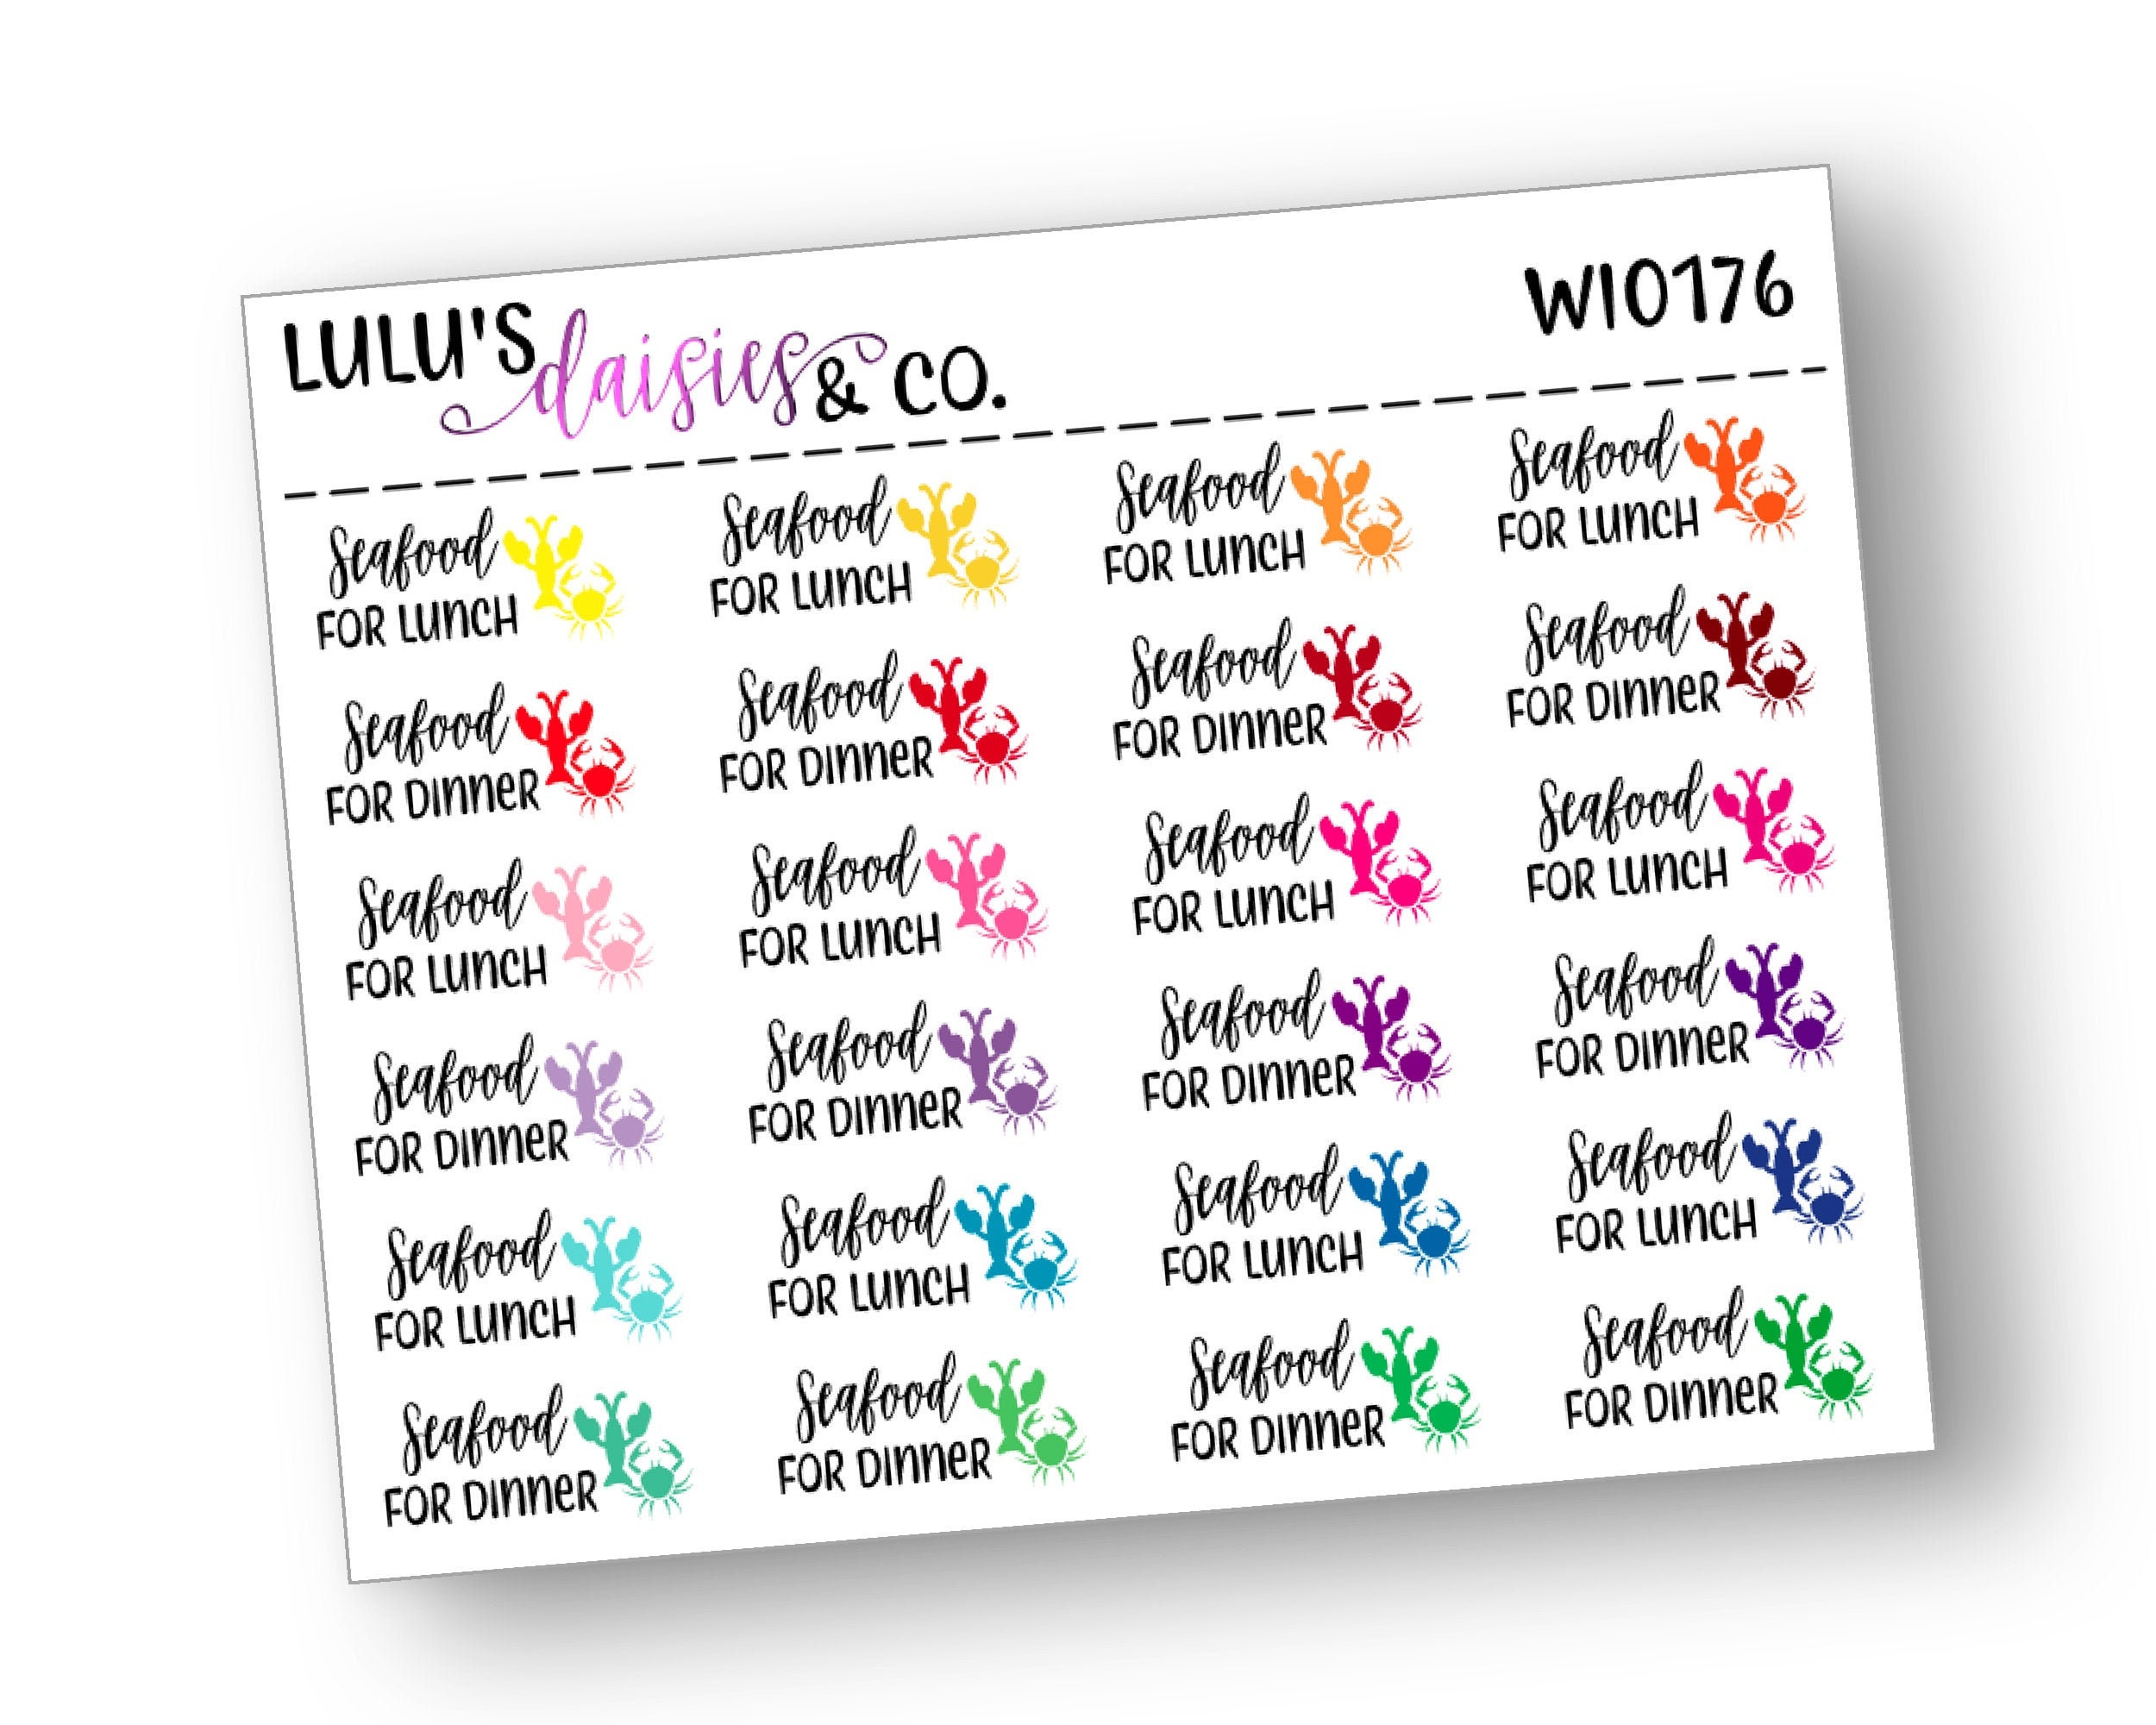 Seafood, Words & Icons, Icon Stickers, Multi Color, Planner Stickers, Matte Sticker Paper, [Wi0176] Multicolor